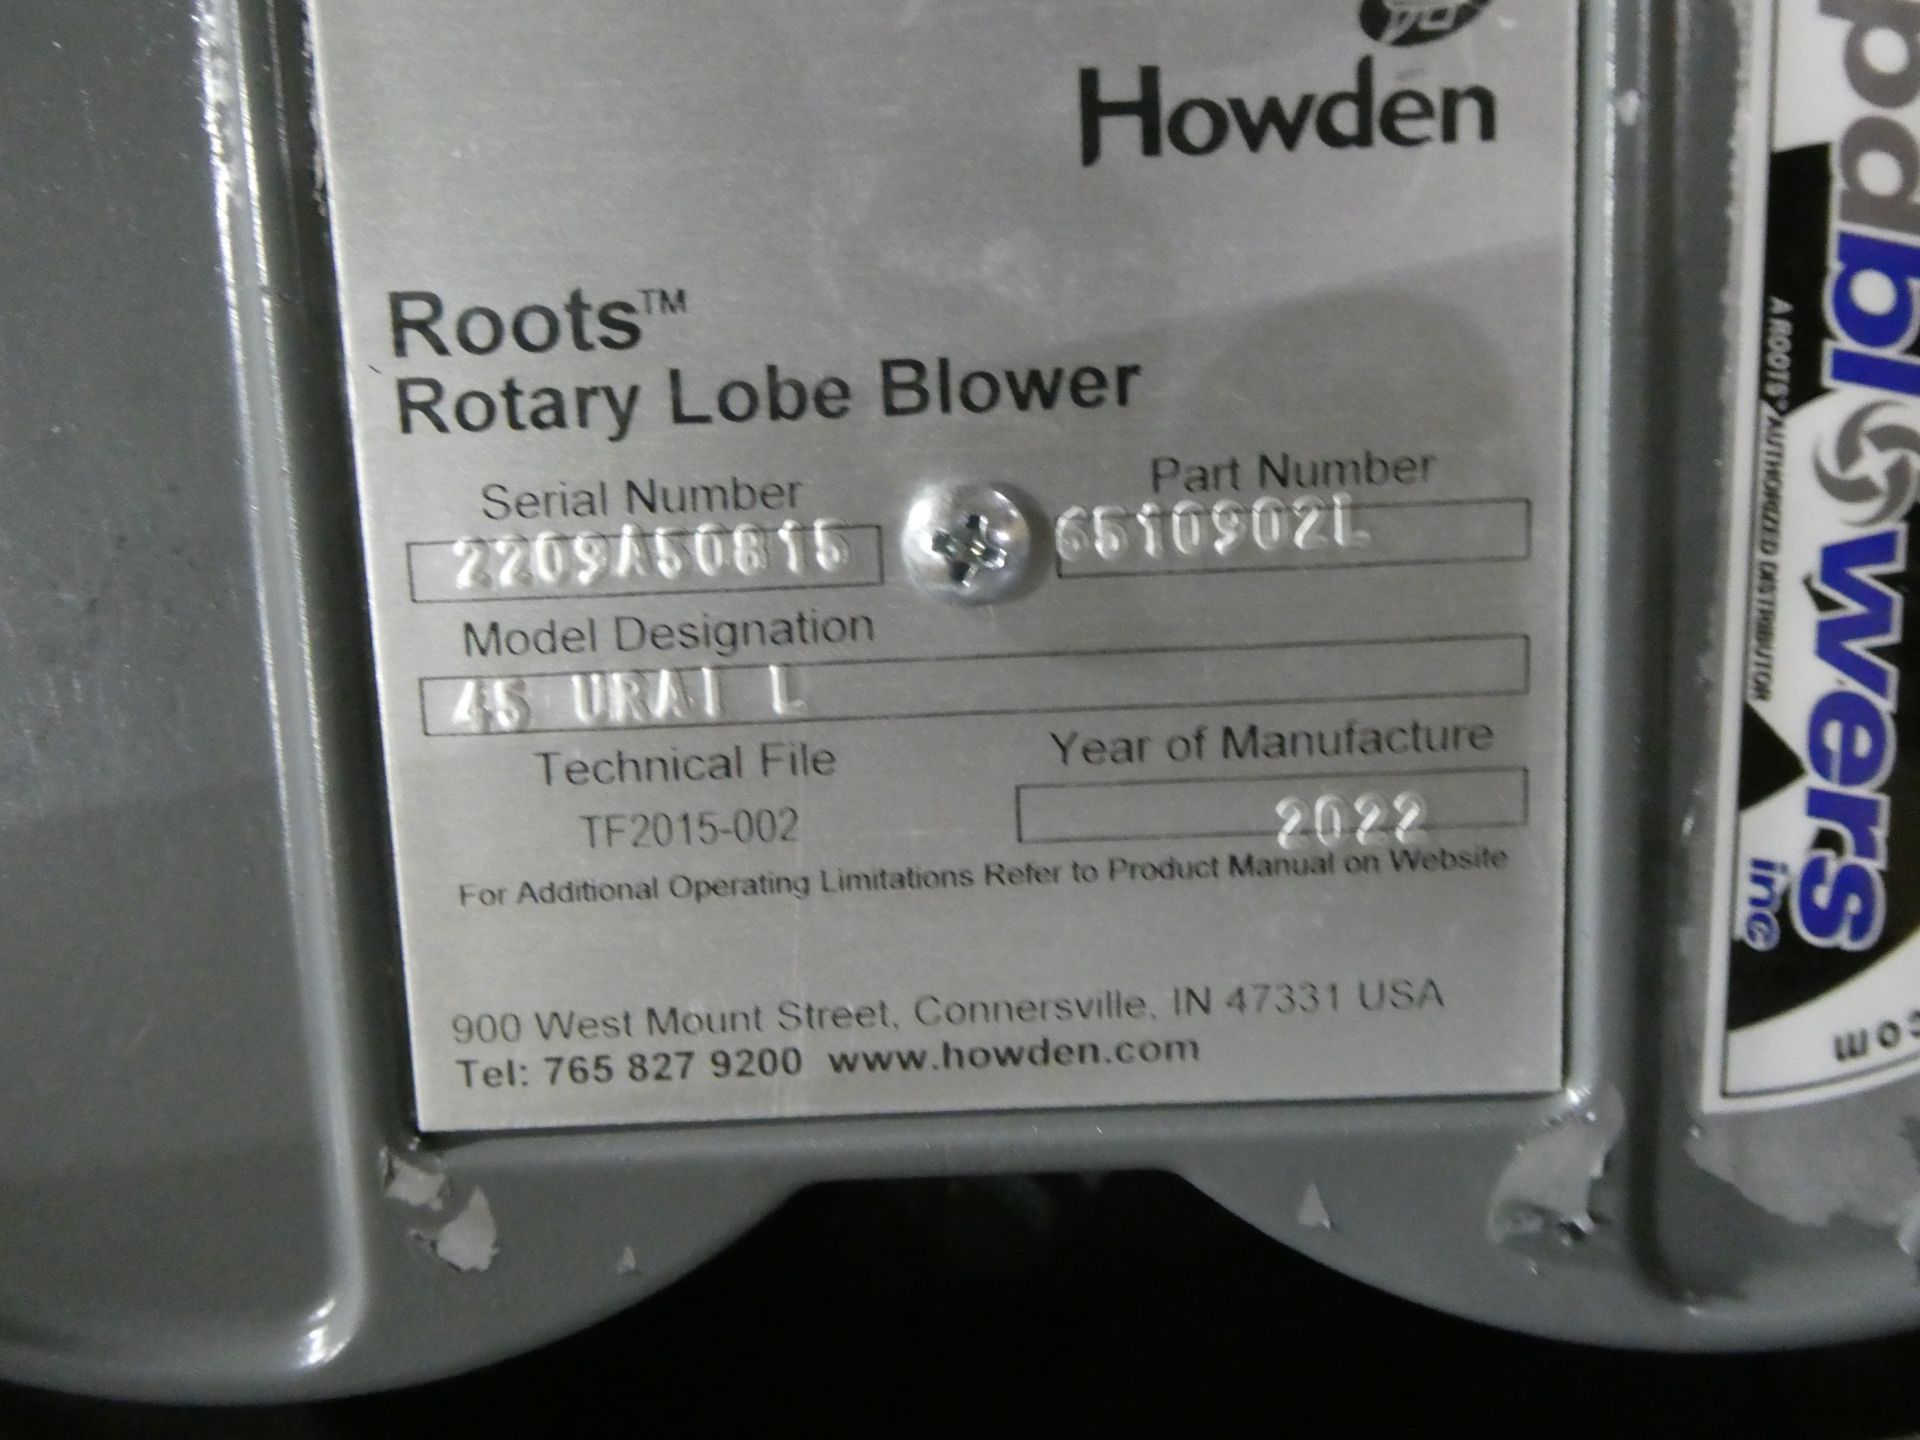 New Howden Roots Rotary Lobe Blower - Image 2 of 3